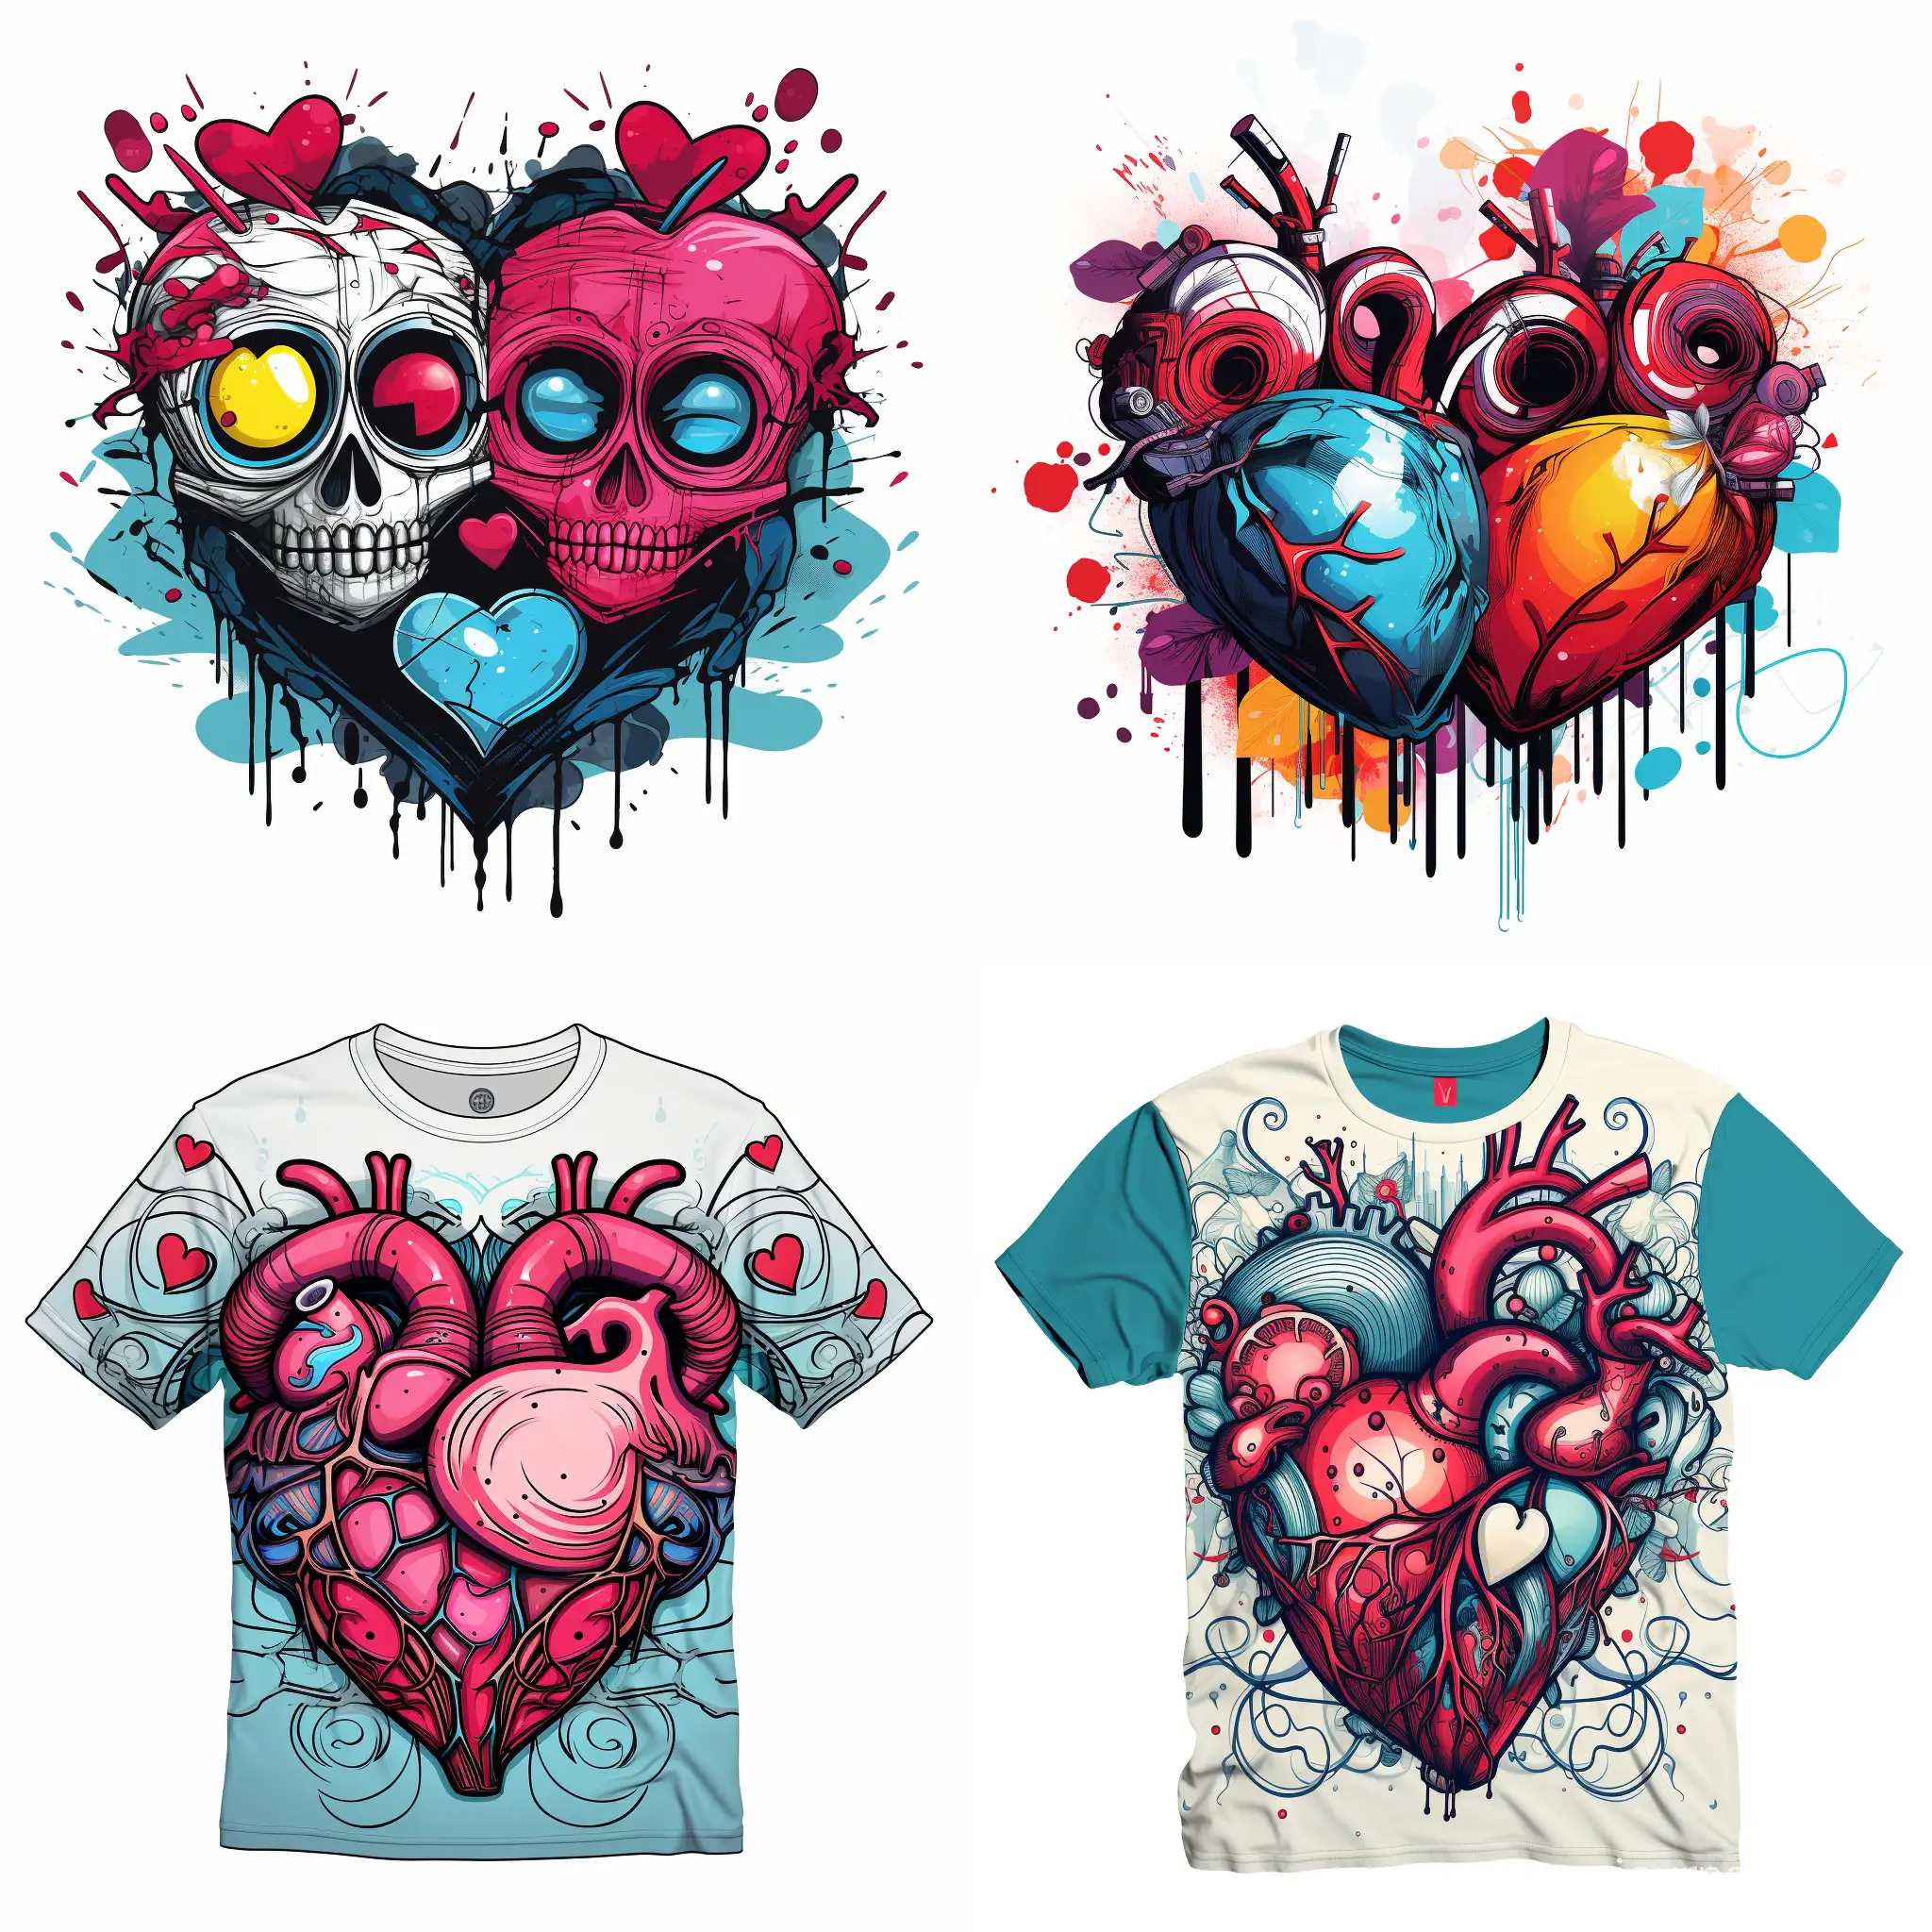 Colorful-Graffiti-Heart-Tshirt-Design-for-Valentines-Day-on-White-Background